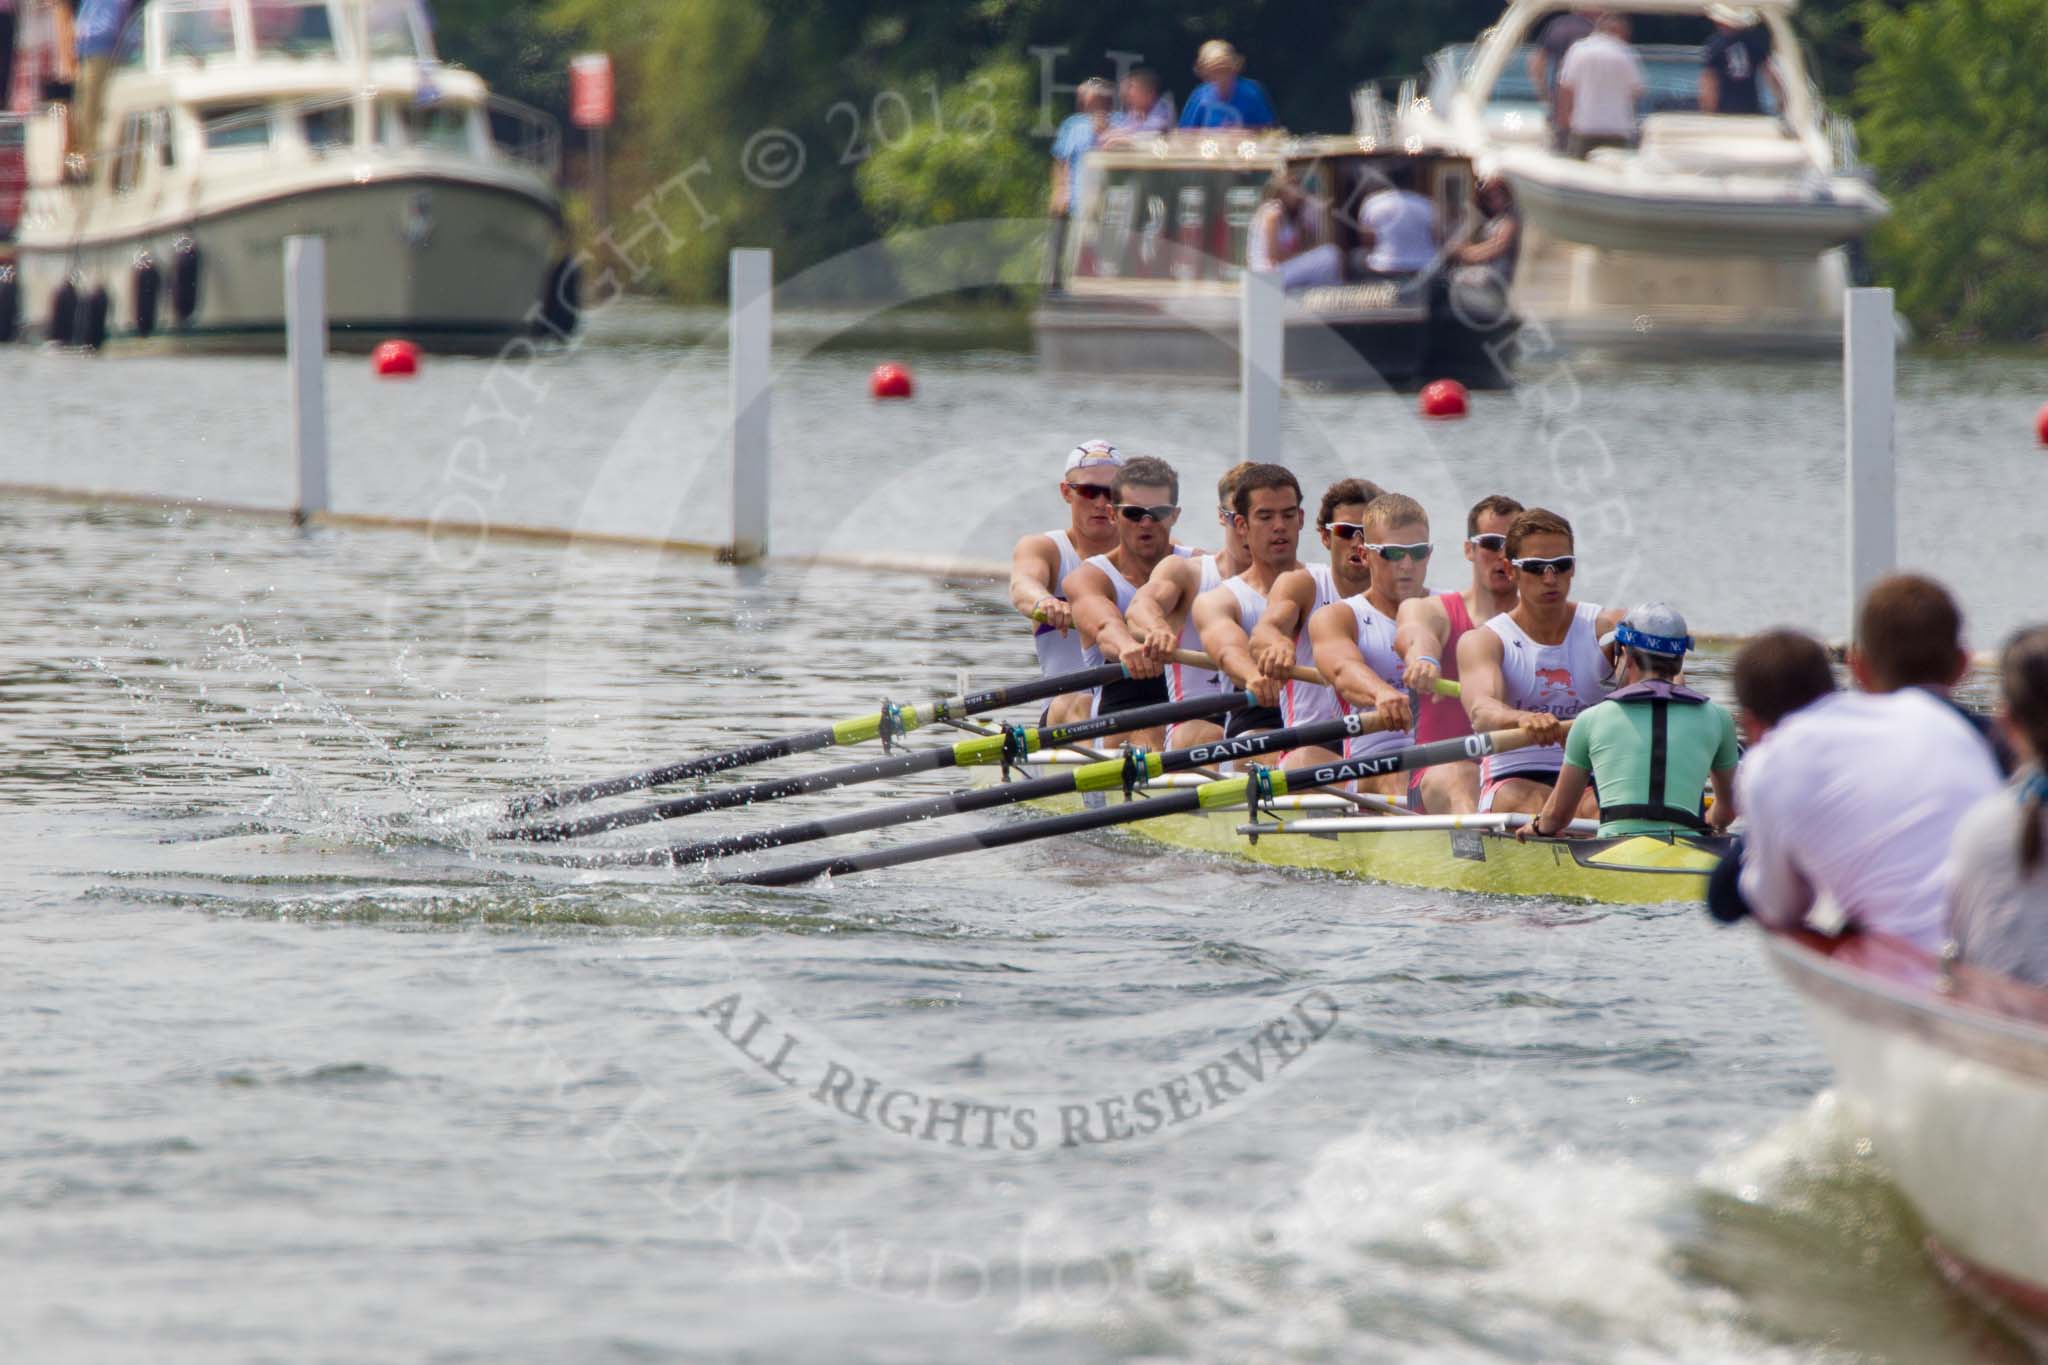 Henley Royal Regatta 2013, Saturday: Race No. 14 for the Ladies' Challenge Cup, Leander Club and Molesey Boat Club v University of Washington (U.S.A.). Image #285, 06 July 2013 12:11 River Thames, Henley on Thames, UK